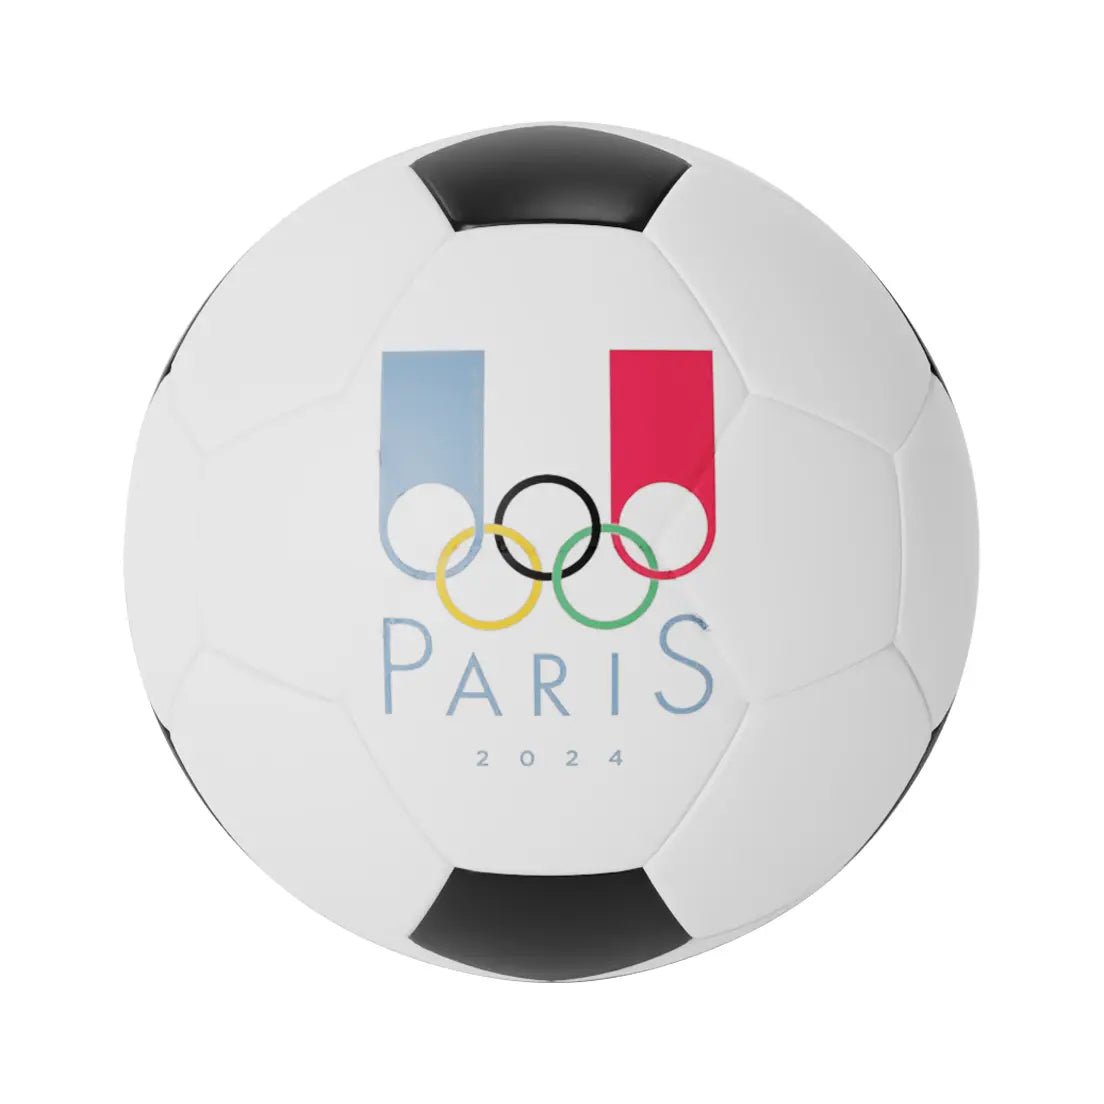 Personalized Custom Paris Olympics Themed Soccer Ball - Family Watchs